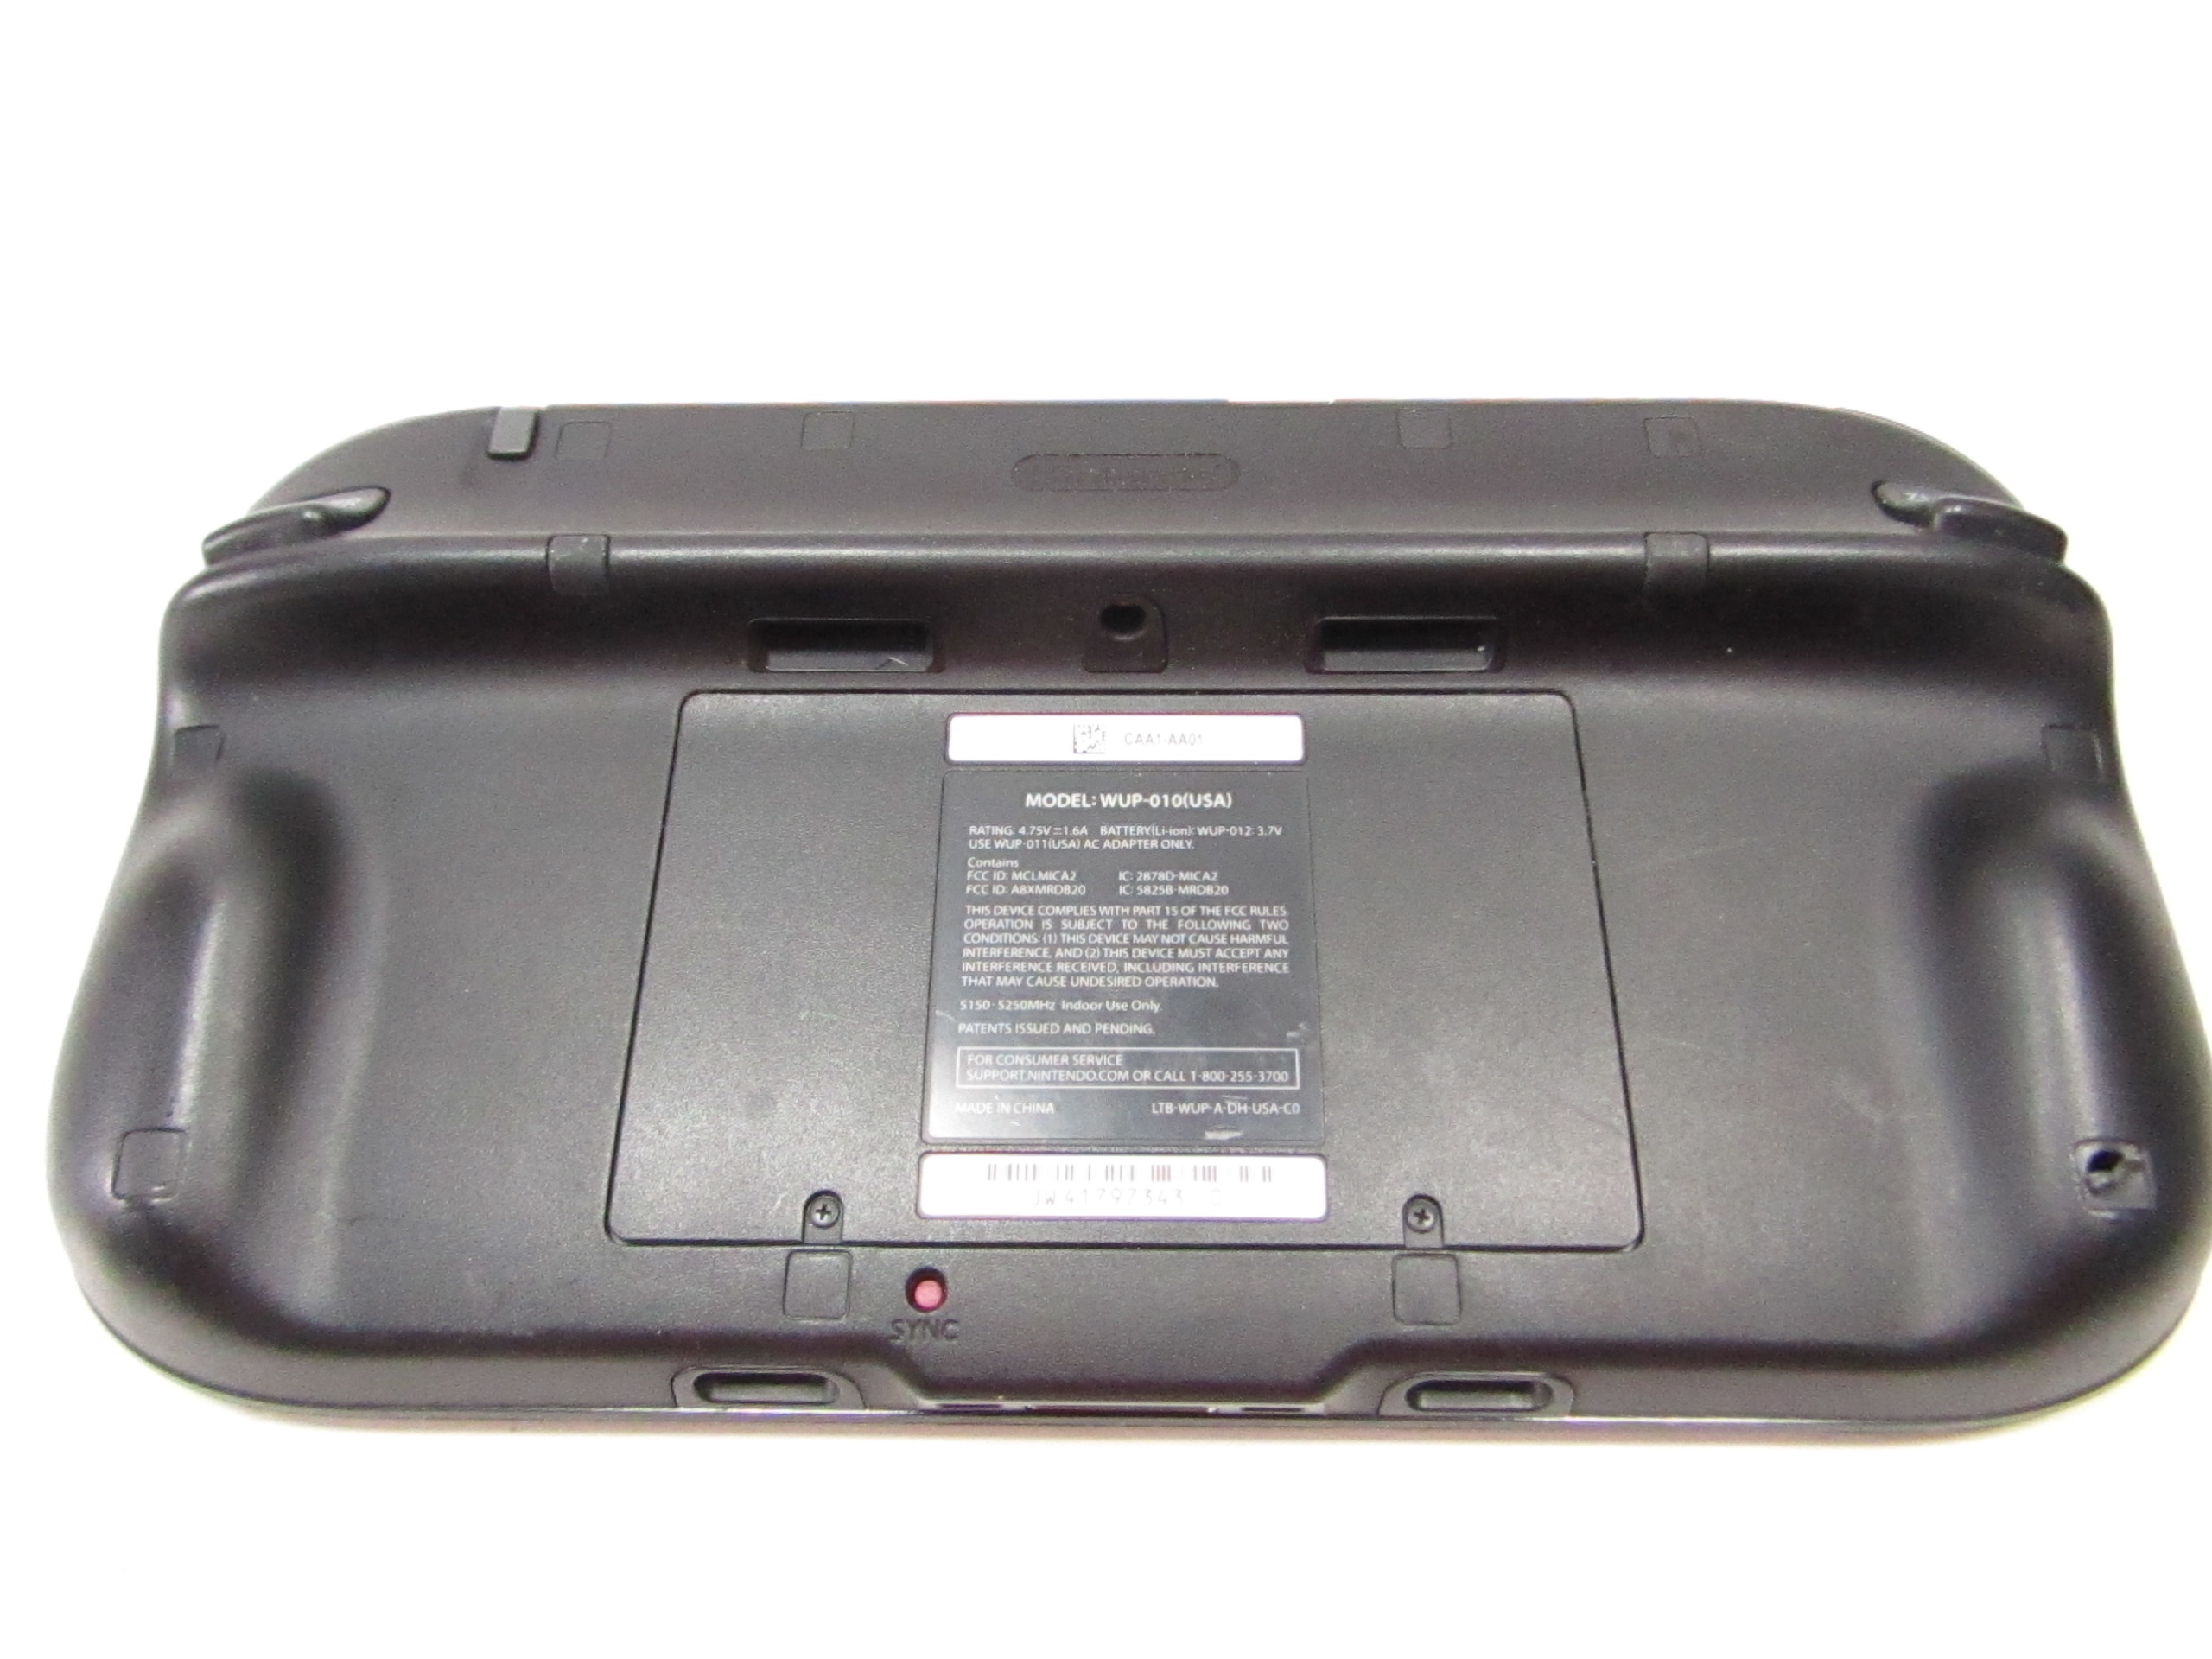 Nintendo wants to bring the 3DS experience to the living room using the Wii- U - The Gadgeteer